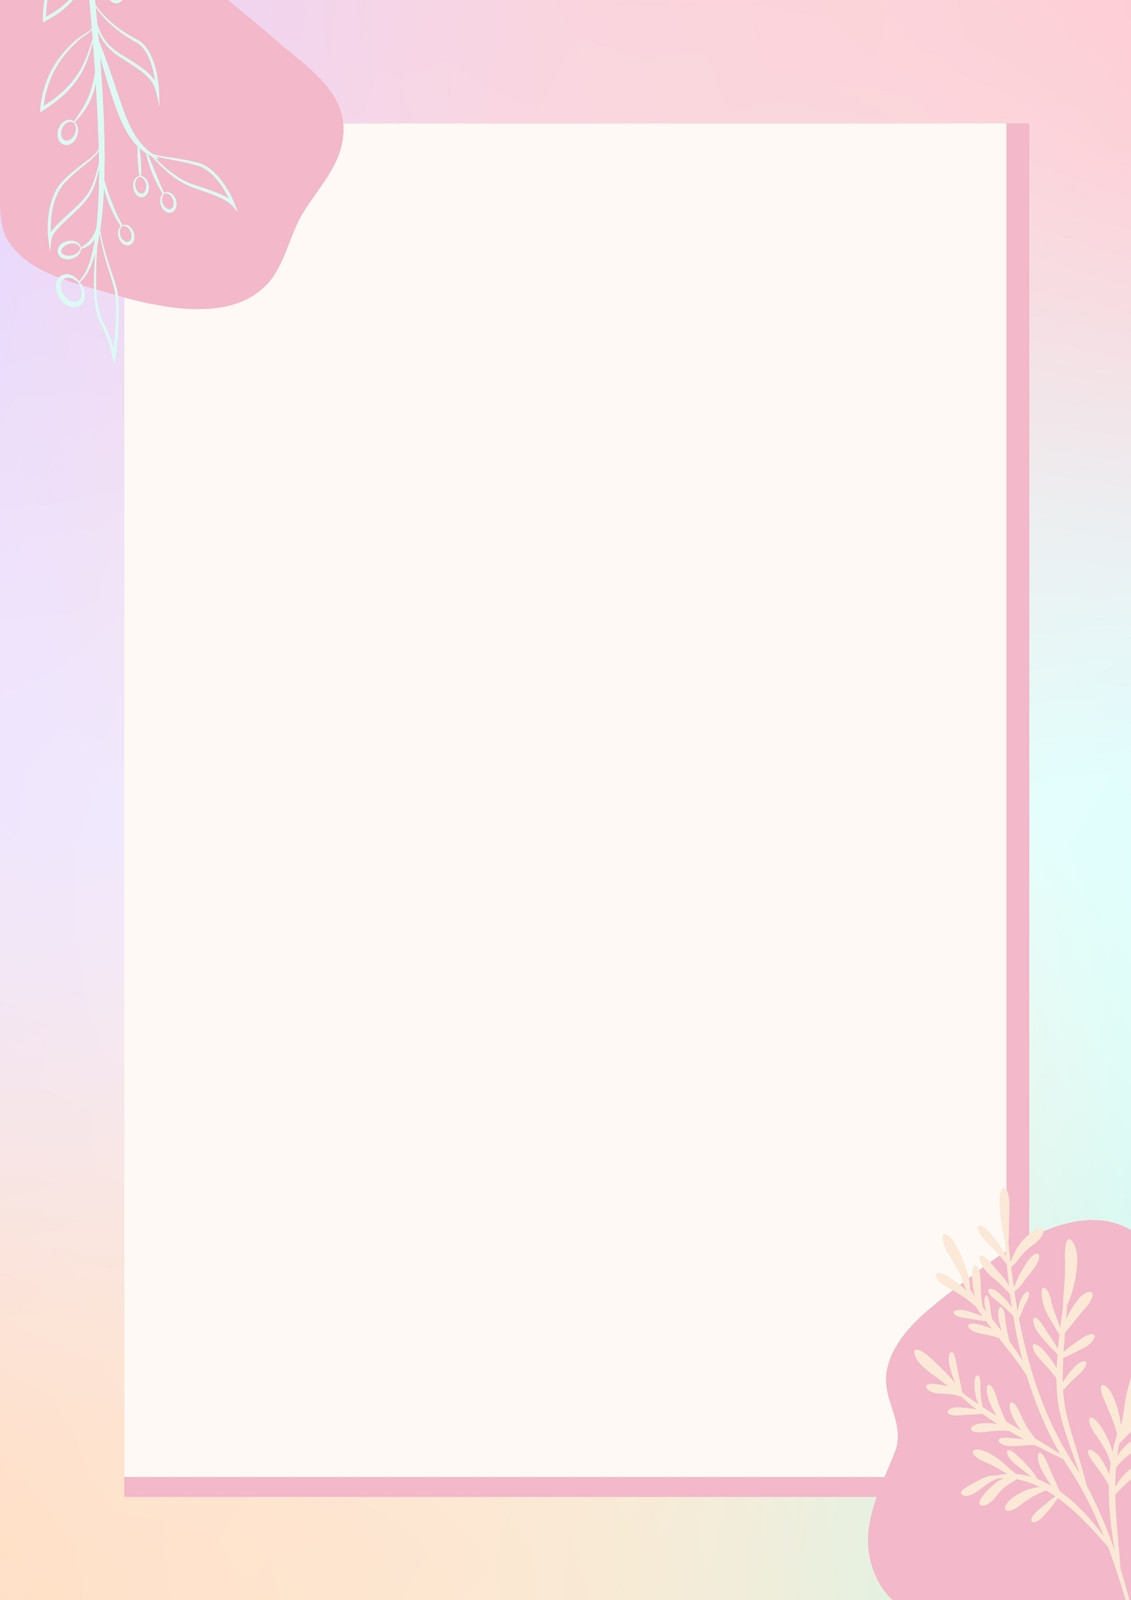 10-professional-pink-background-design-templates-for-your-business-needs